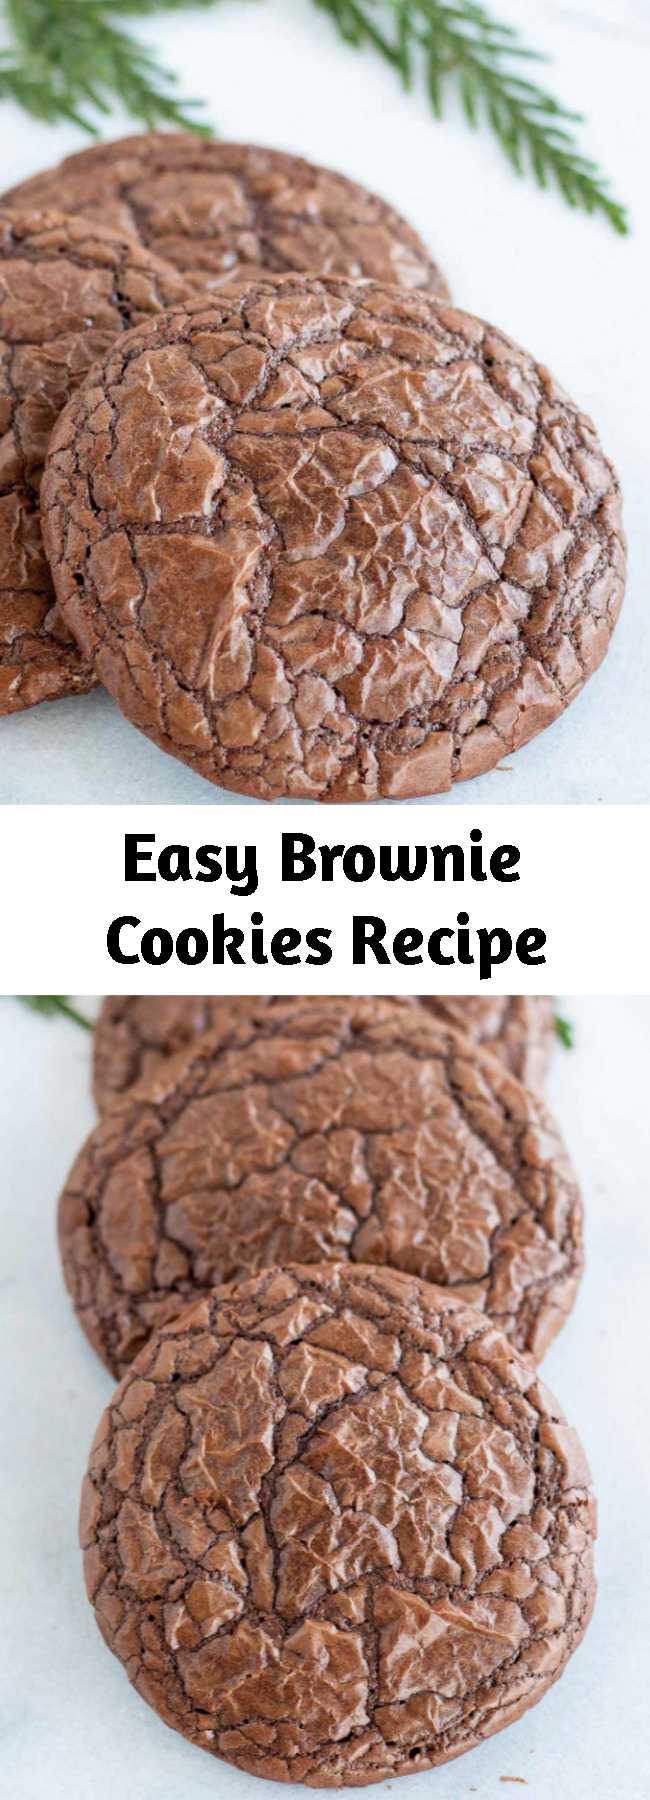 Easy Brownie Cookies Recipe - The best of both worlds! These brownie cookies are your favourite chewy, chocolatey brownies in cookie form!